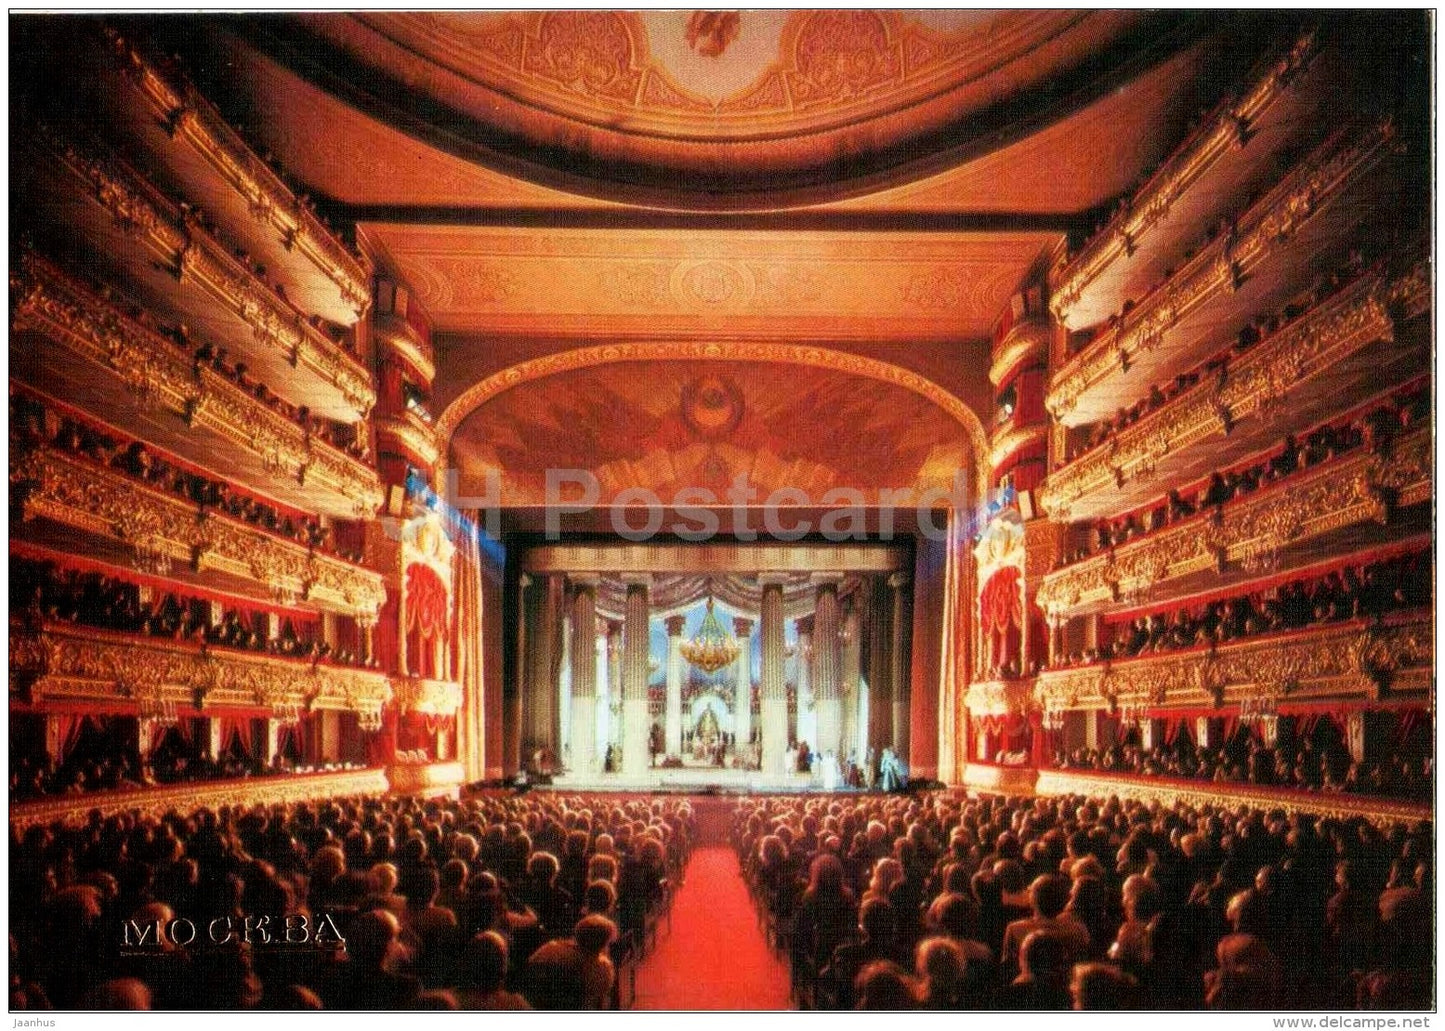 the auditorium of the State Academic Bolshoi Theatre of the USSR - Moscow - 1984 - Russia USSR - unused - JH Postcards